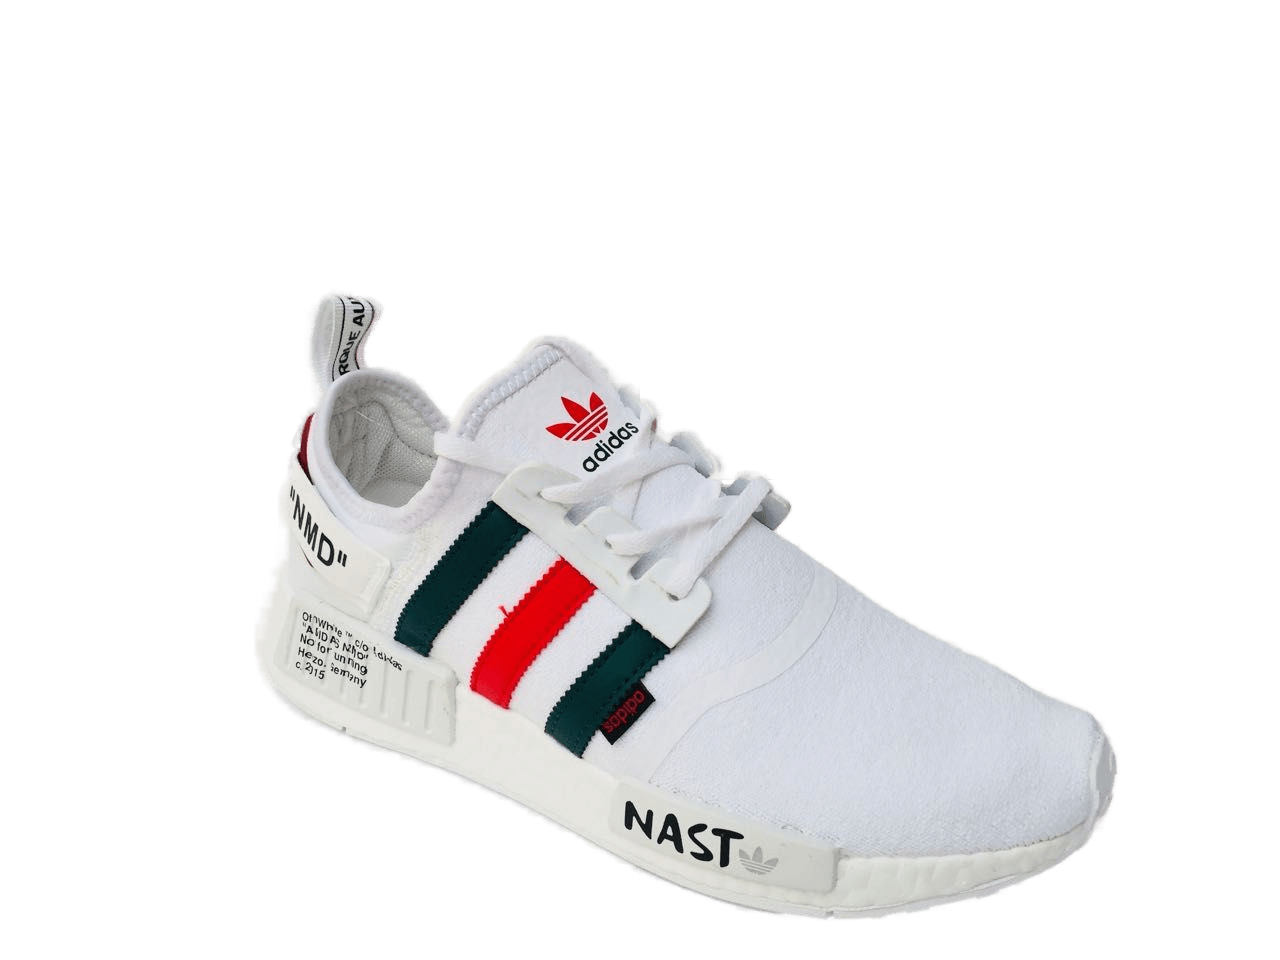  Adidas NMD R1 White/Green/Red